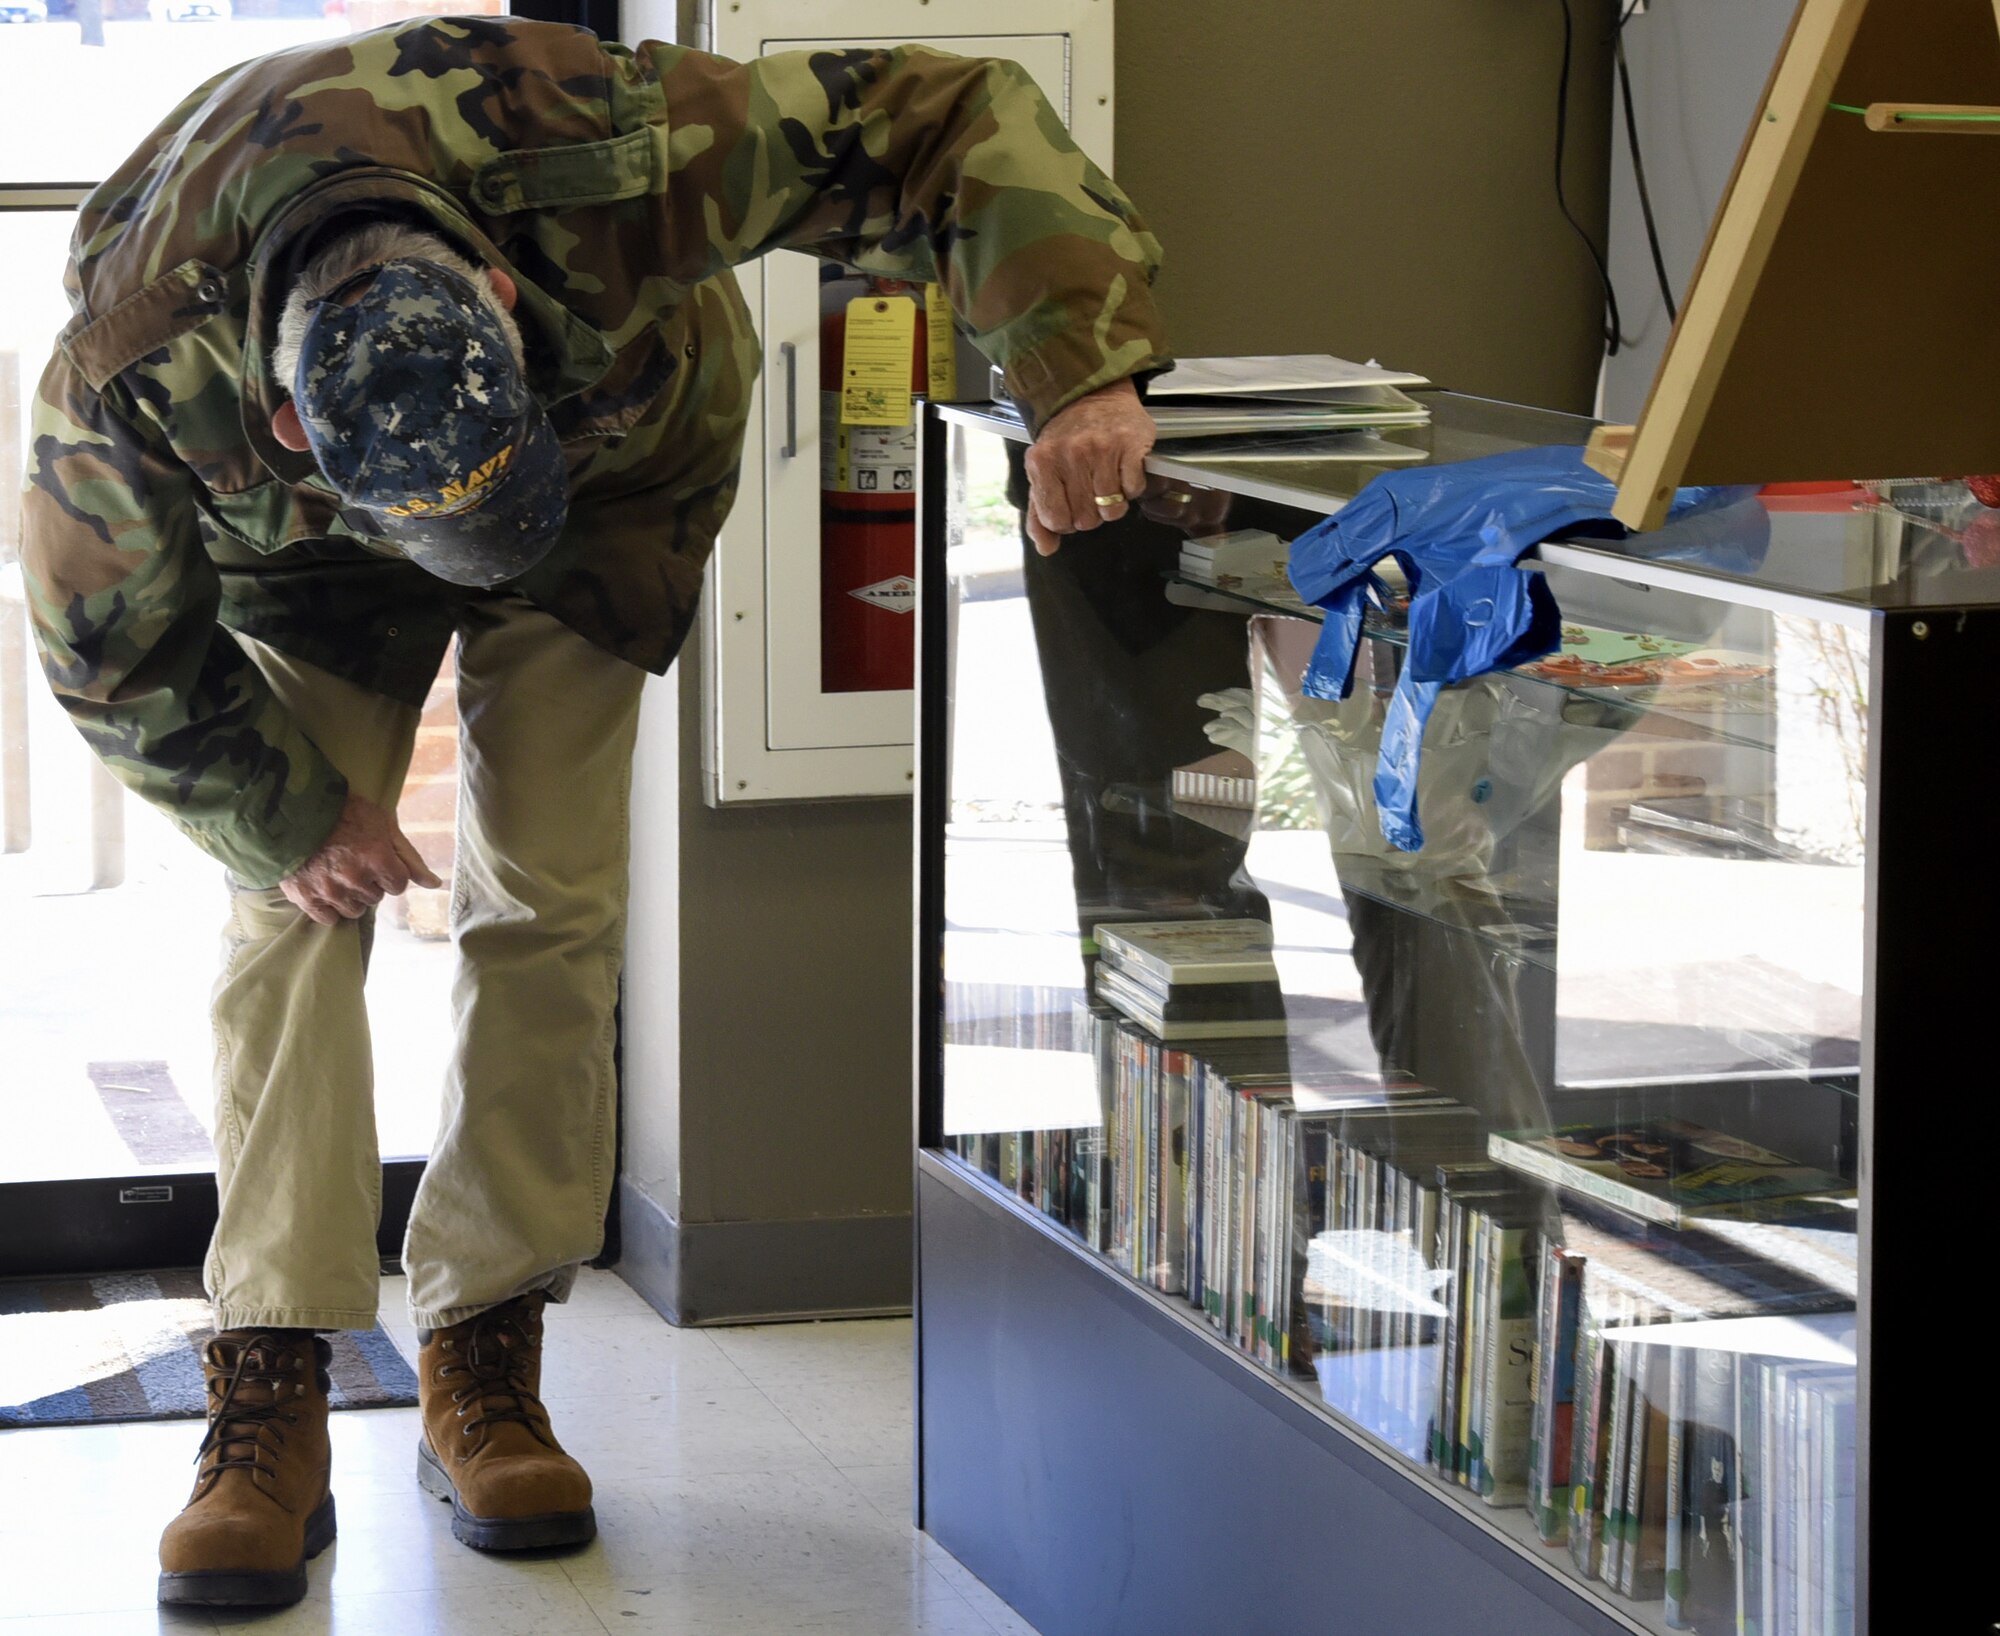 Jack Farris, a retired military veteran views the new products inside the glass case at the Goodfellow Spouses’ Club Thrift Store on Goodfellow Air Force Base, Jan. 19, 2019. Farris and his wife regularly come to the thrift store on Saturdays.  (U.S. Air Force photo by Airman 1st Class Abbey Rieves/Released)